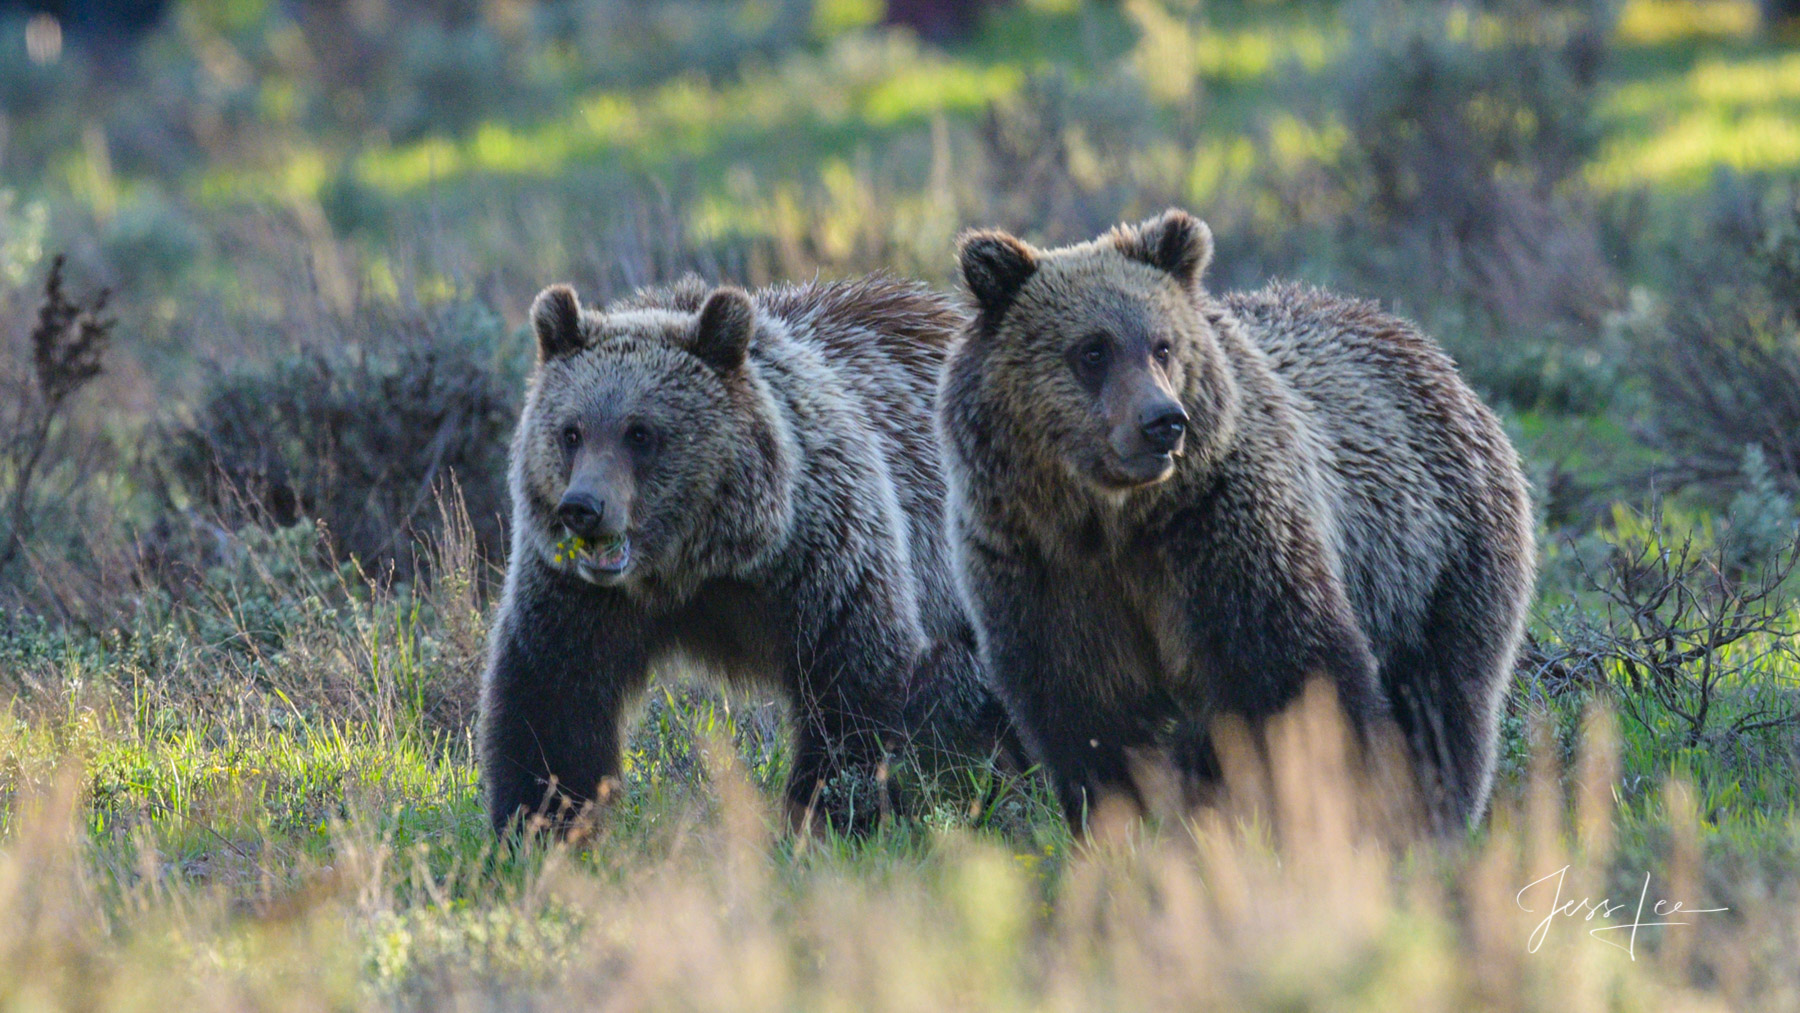 Grand Teton Grizzly cubs. Limited Edition of 50 Exclusive high-resolution Museum Quality Fine Art Prints.  These Grizzly bear...